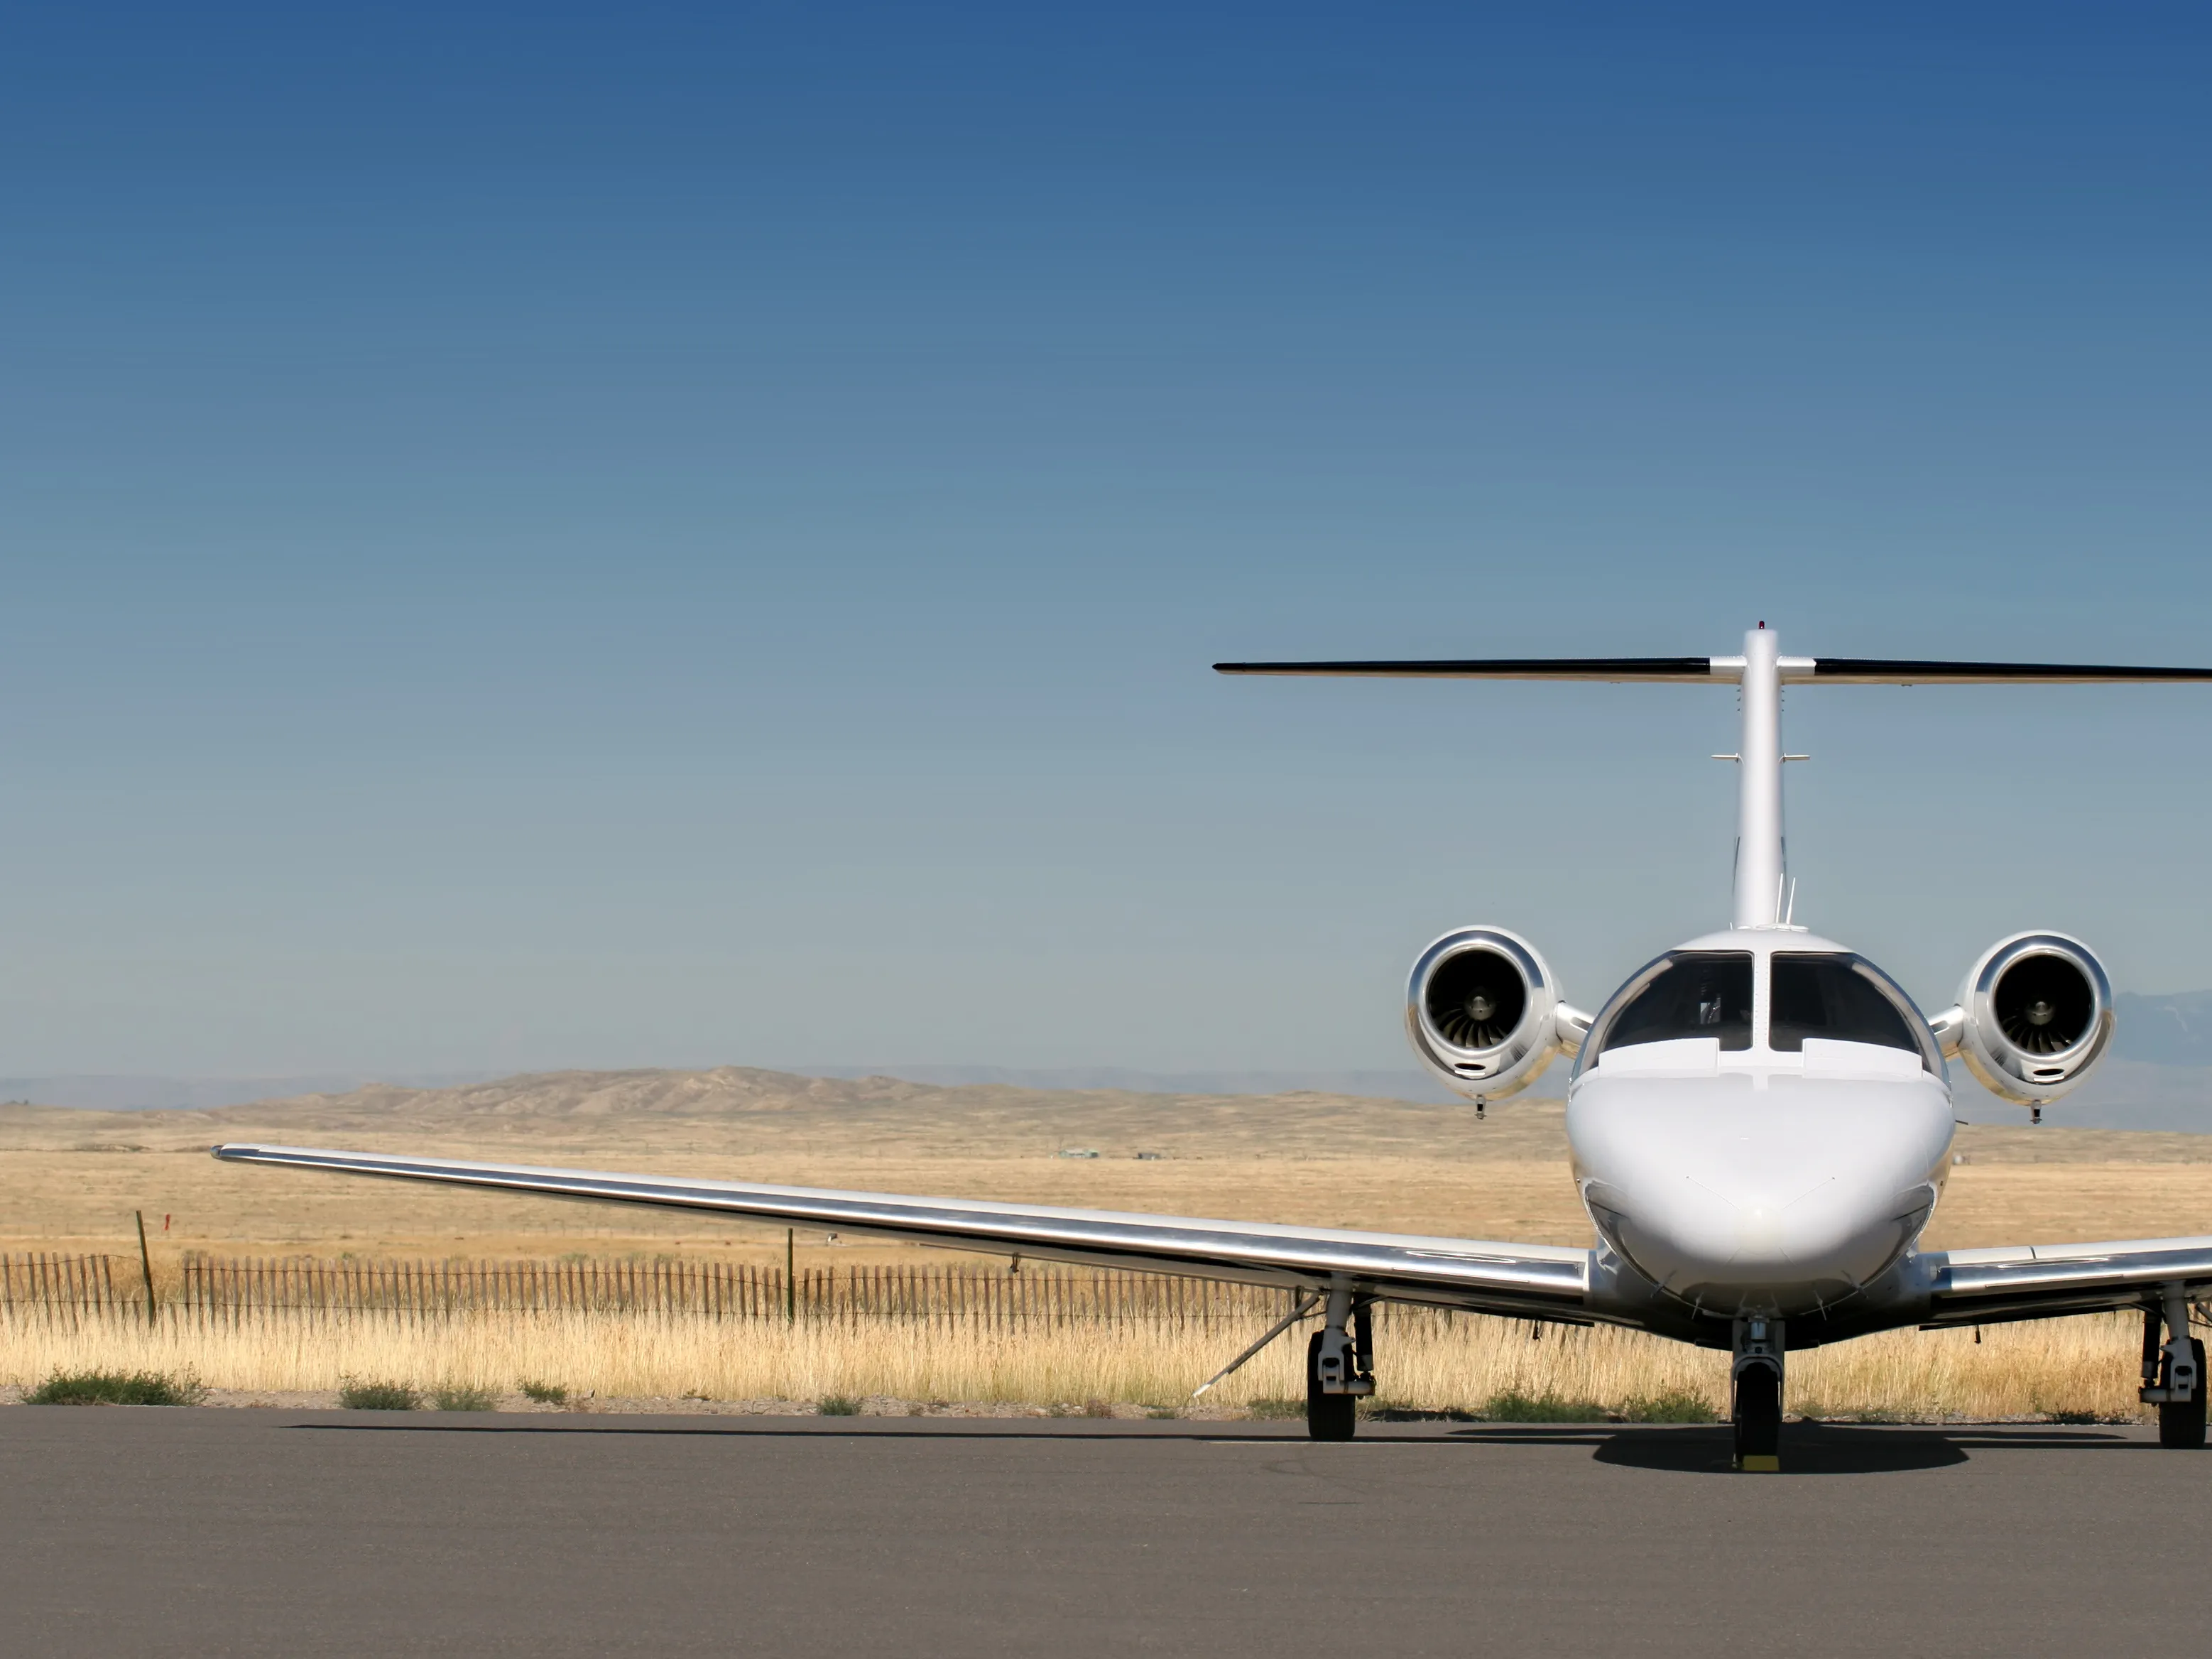 Business jet shown from its front standing against a plain field in the background